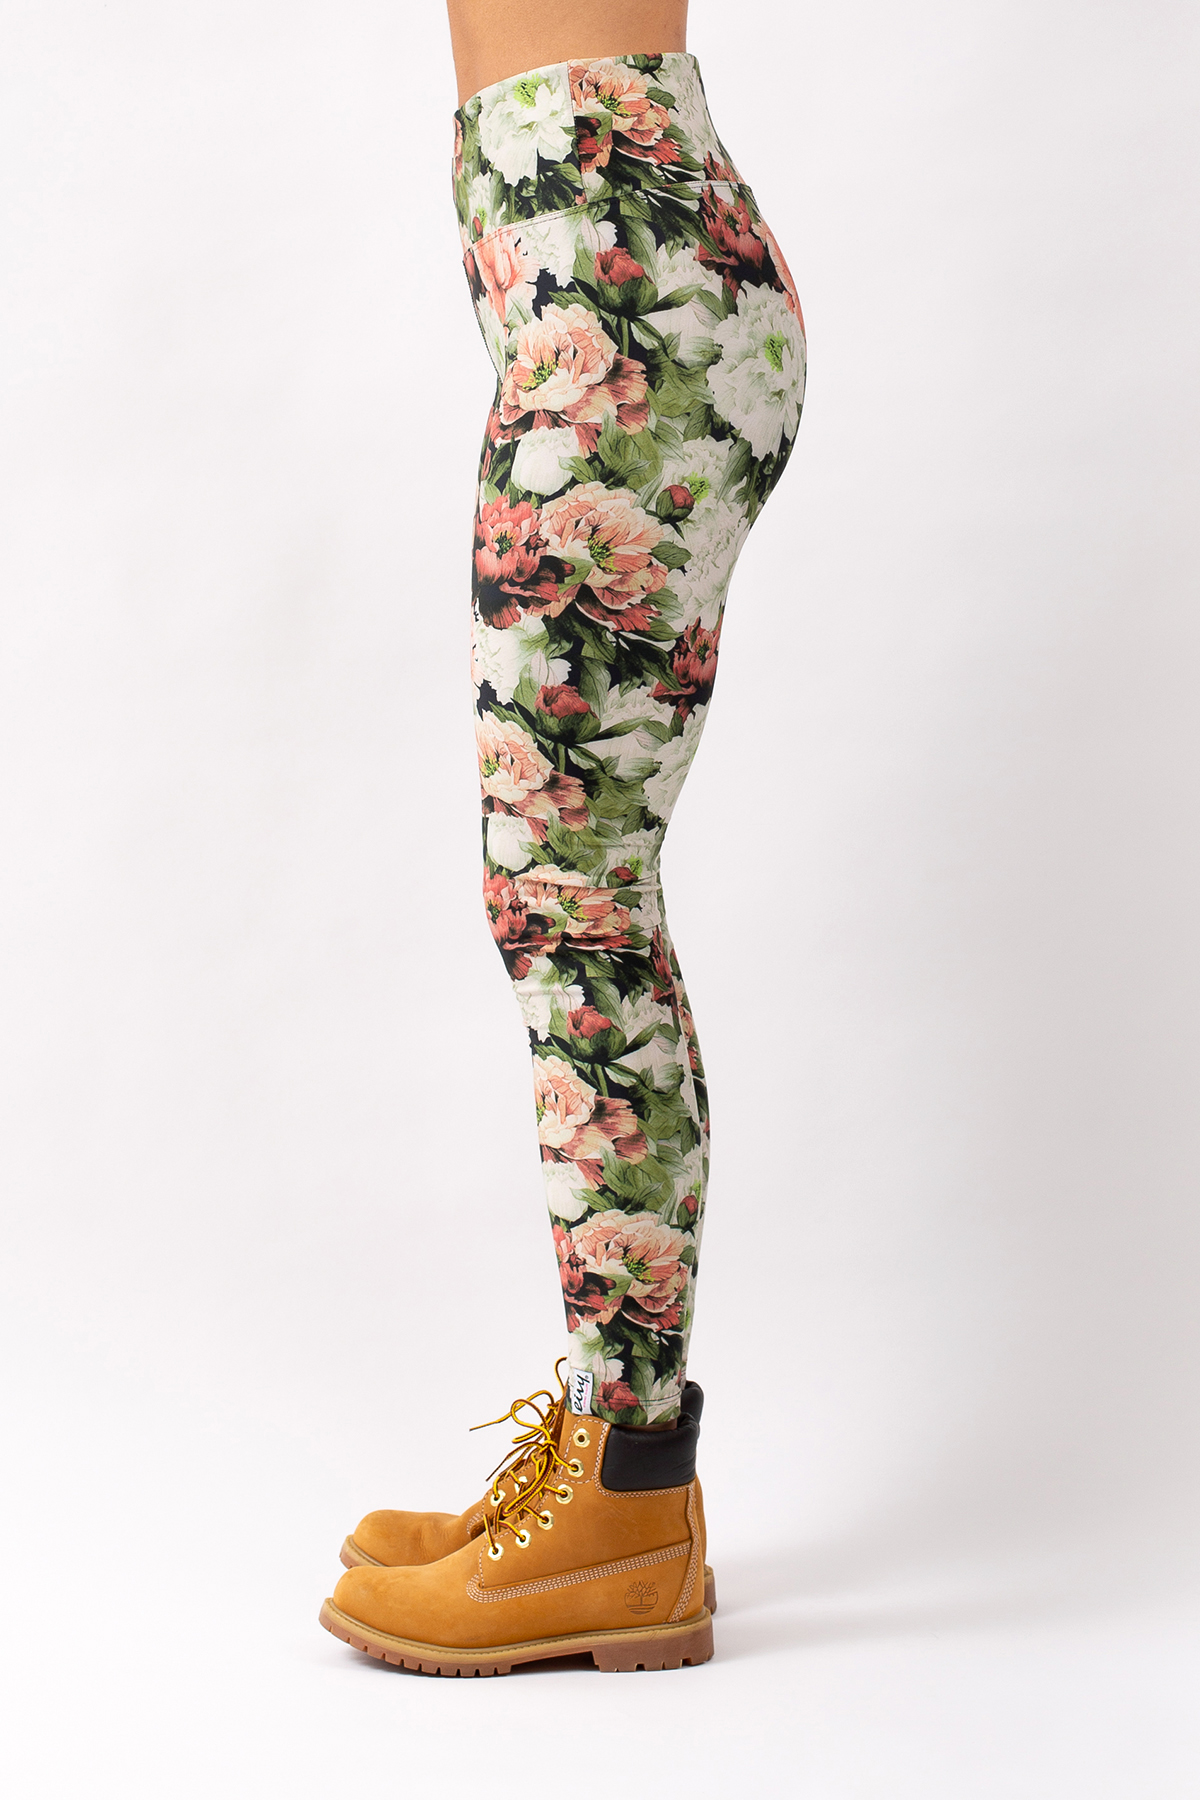 Base Layer | Icecold Tights - Autumn Bloom | S